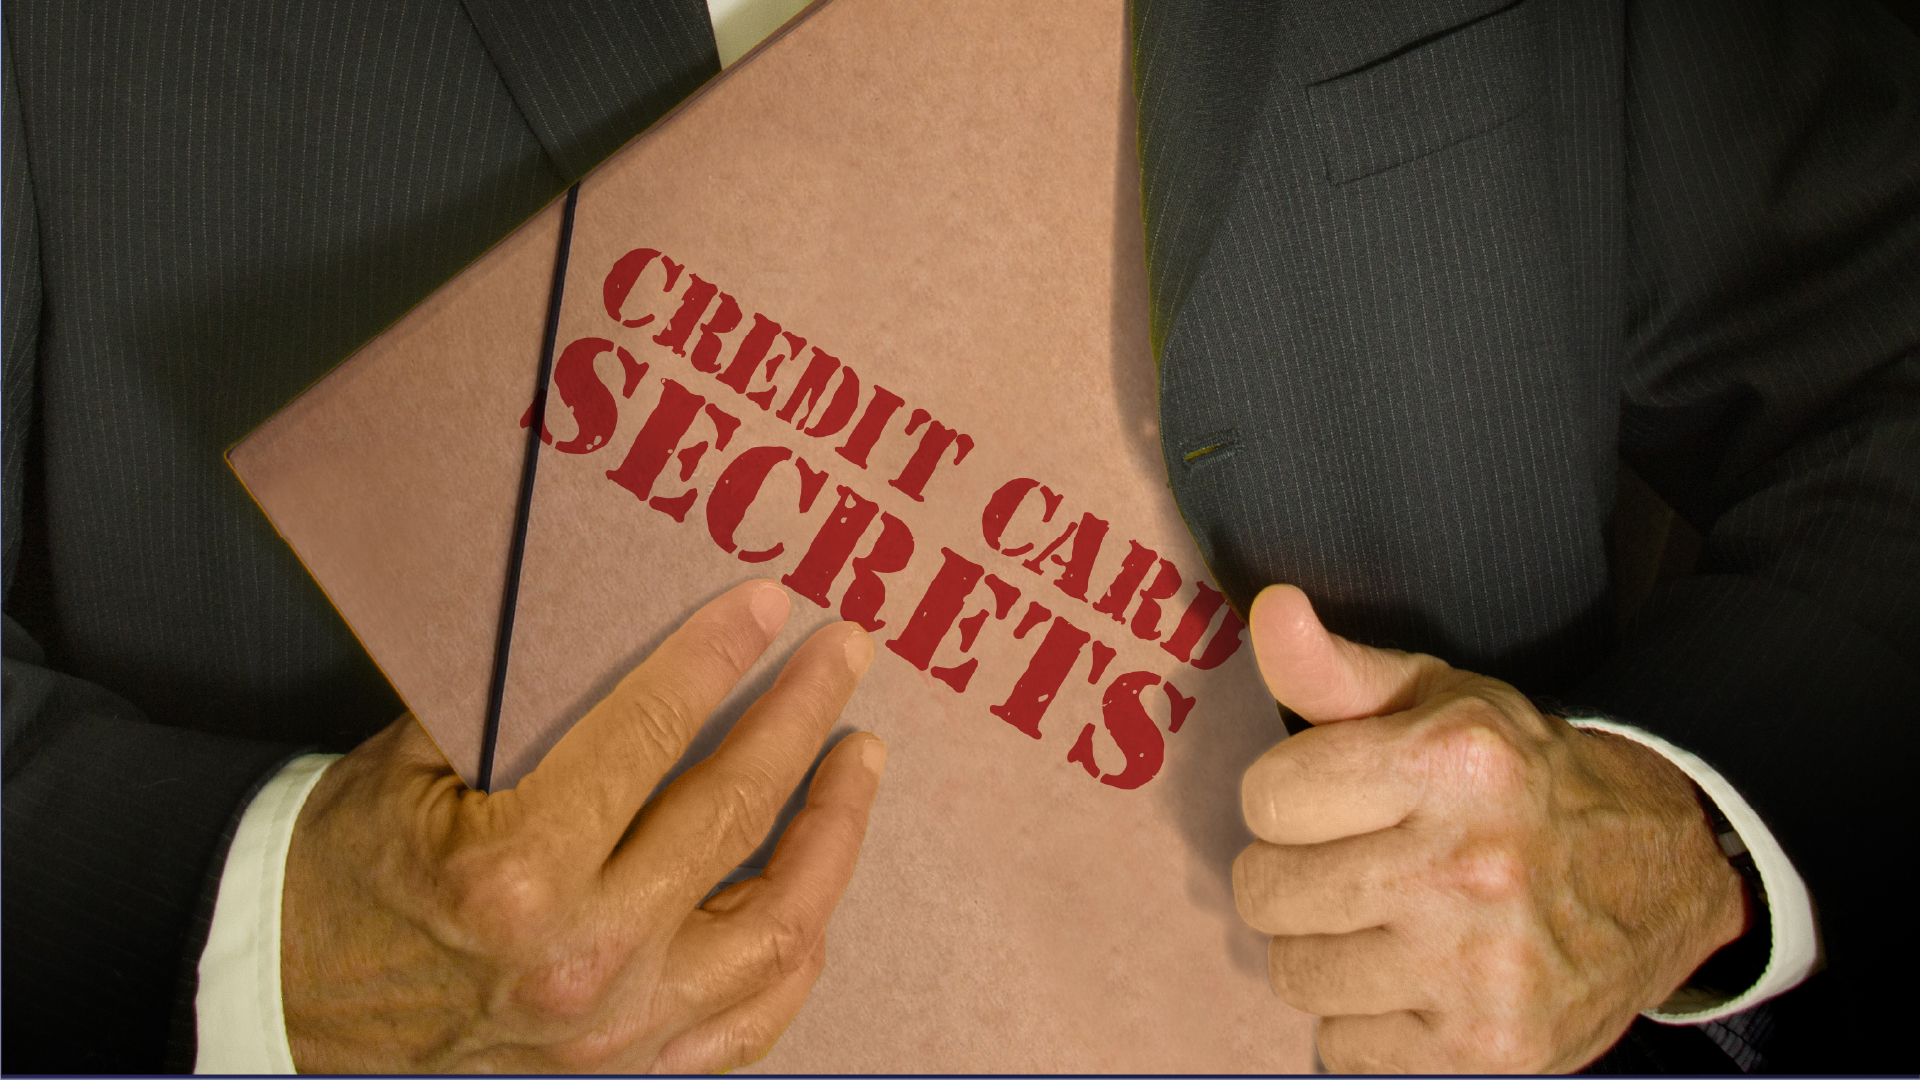 File folder of credit card secrets being slipped into an overcoat.